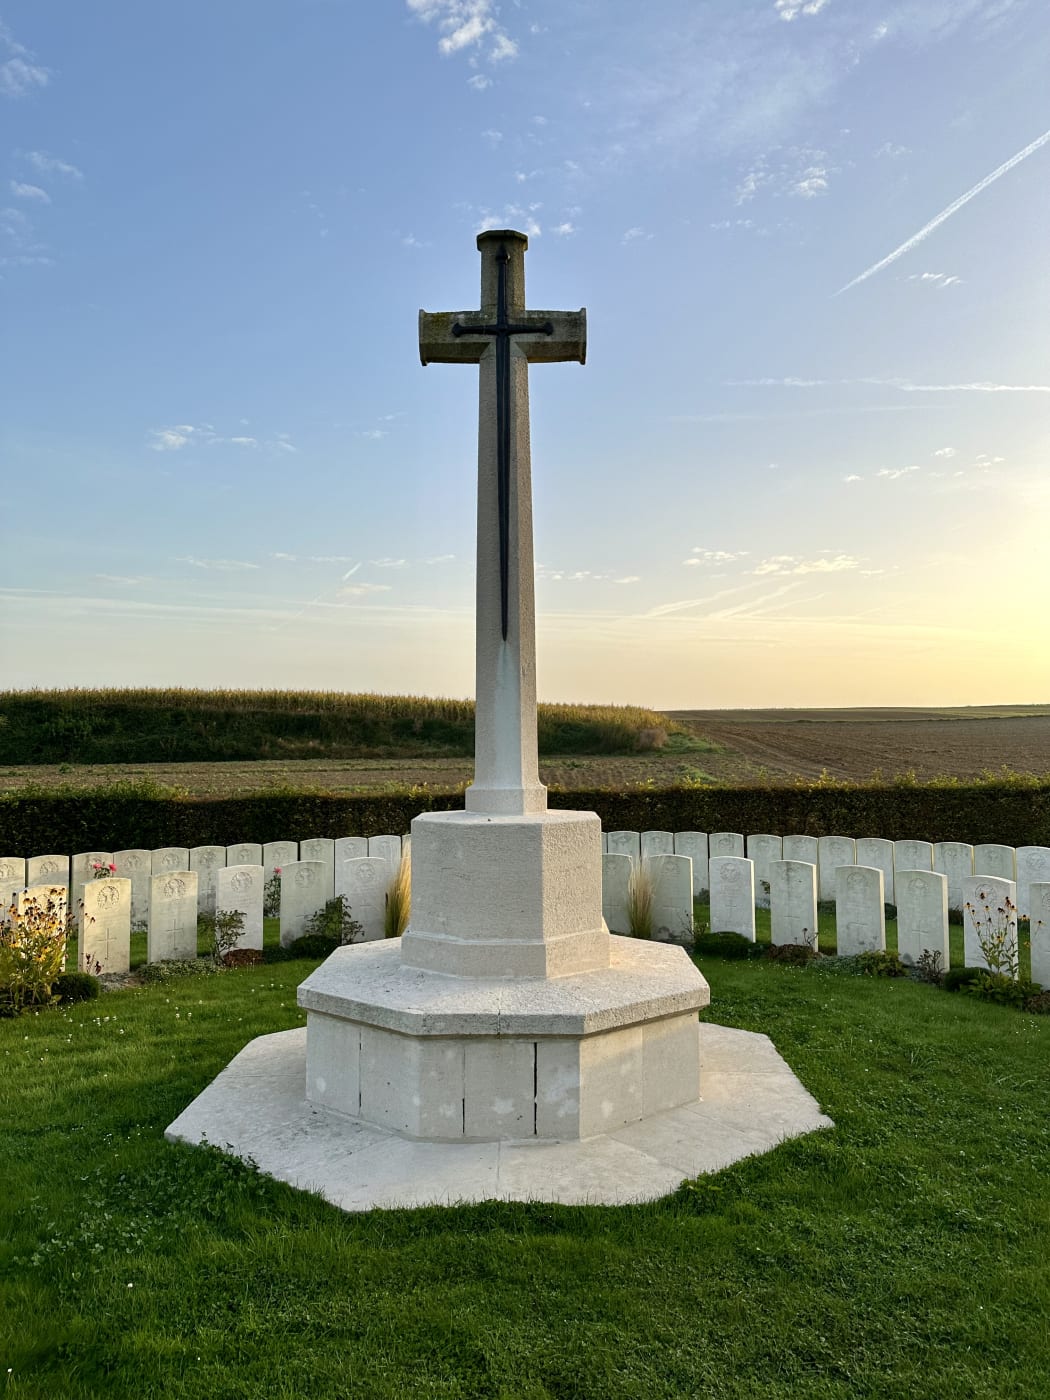 One of the many Commonwealth War Graves in France